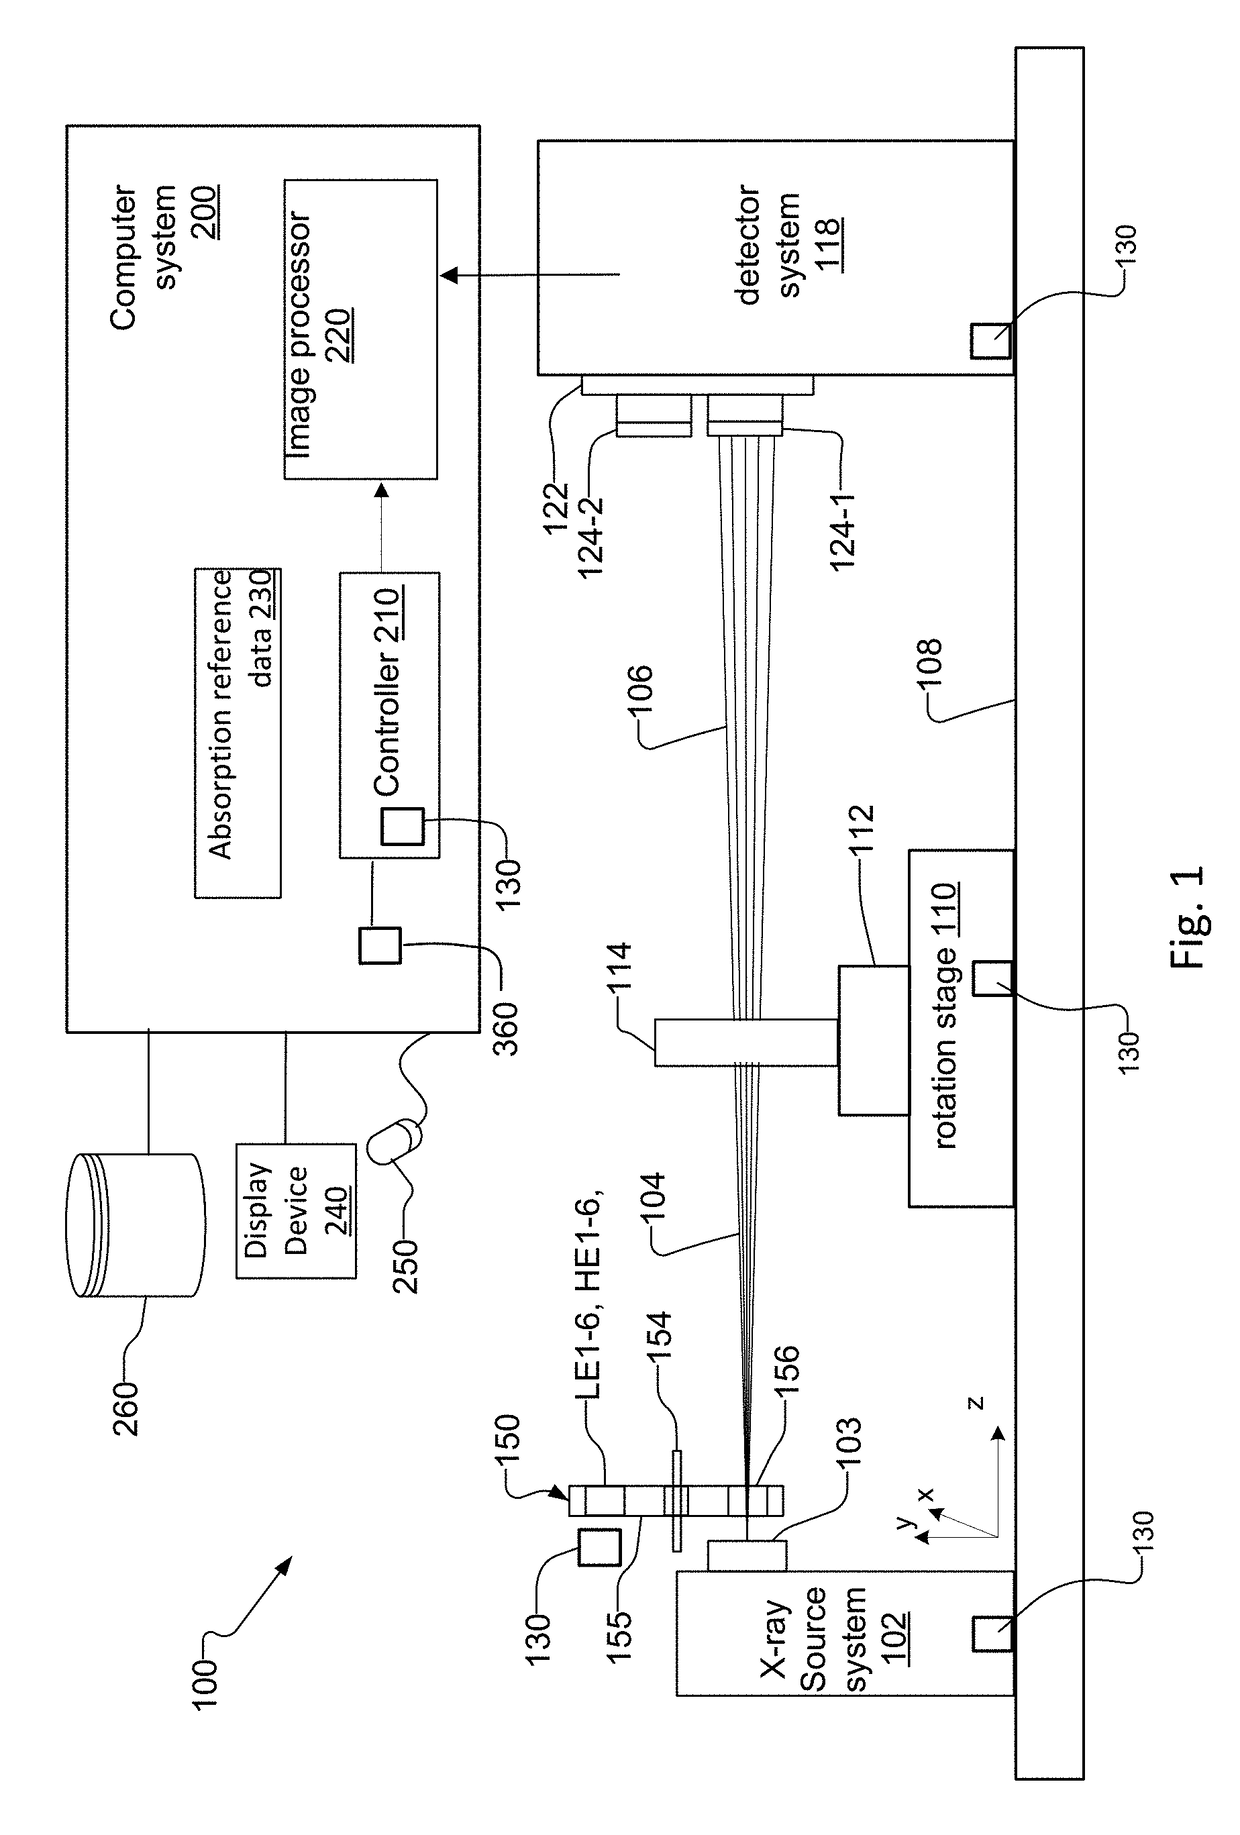 Method and system for spectral characterization in computed tomography x-ray microscopy system